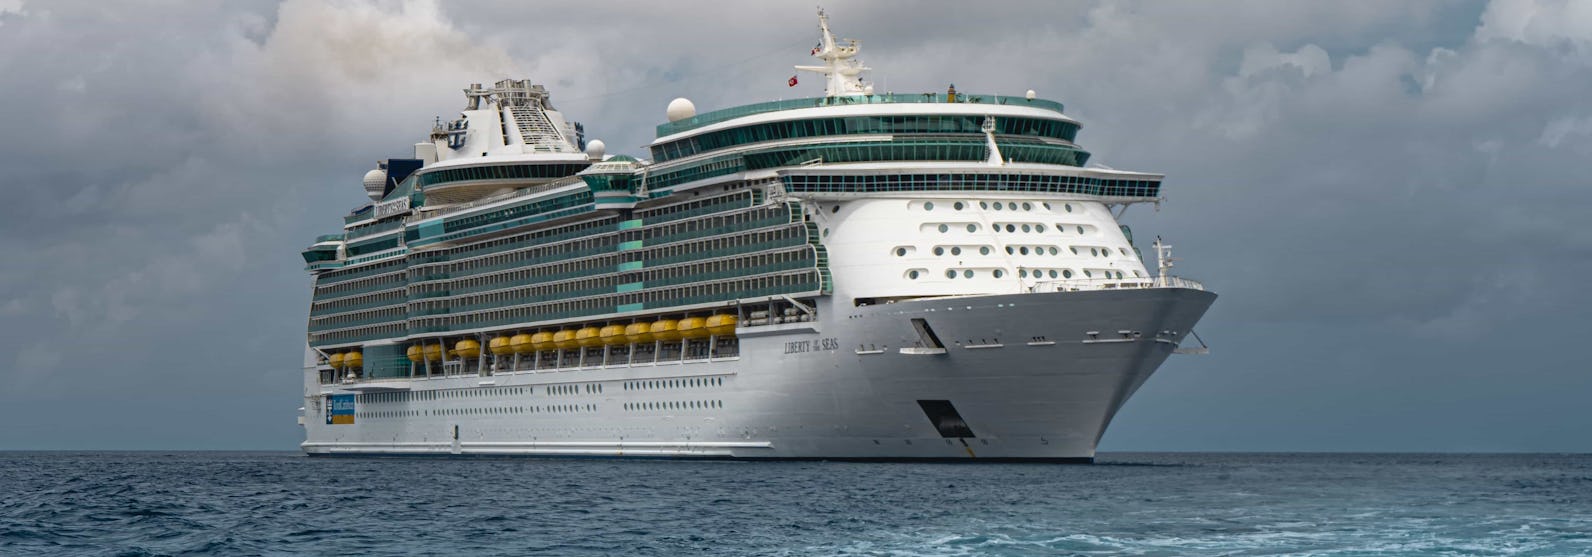 Cruises Around the World from Royal Caribbean